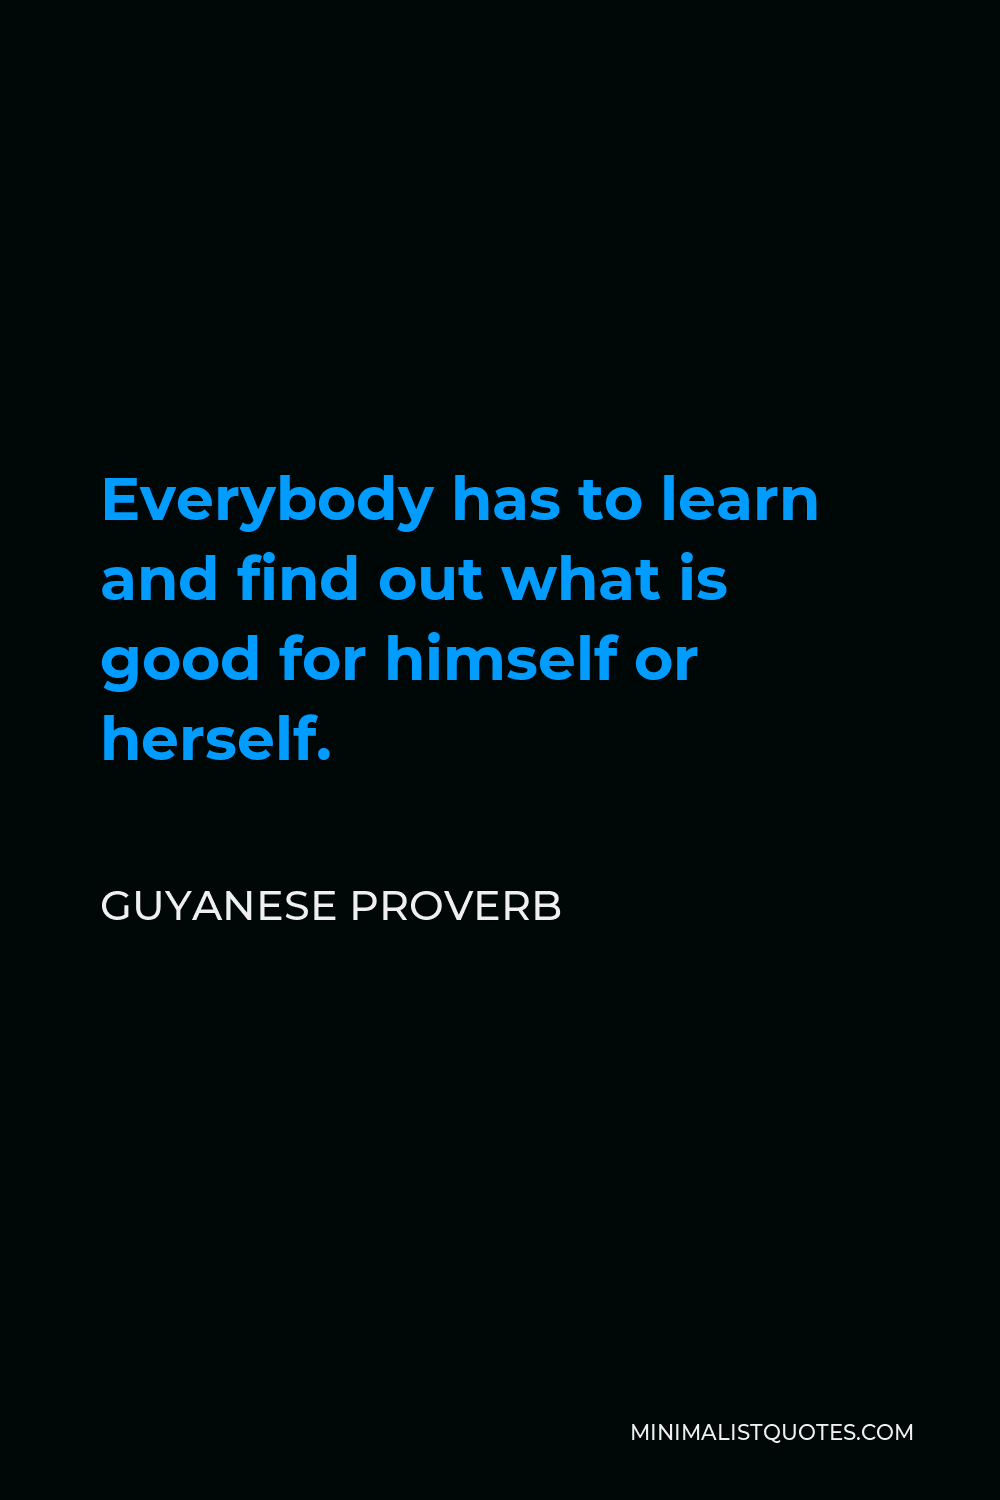 Guyanese Proverb Quote - Everybody has to learn and find out what is good for himself or herself.